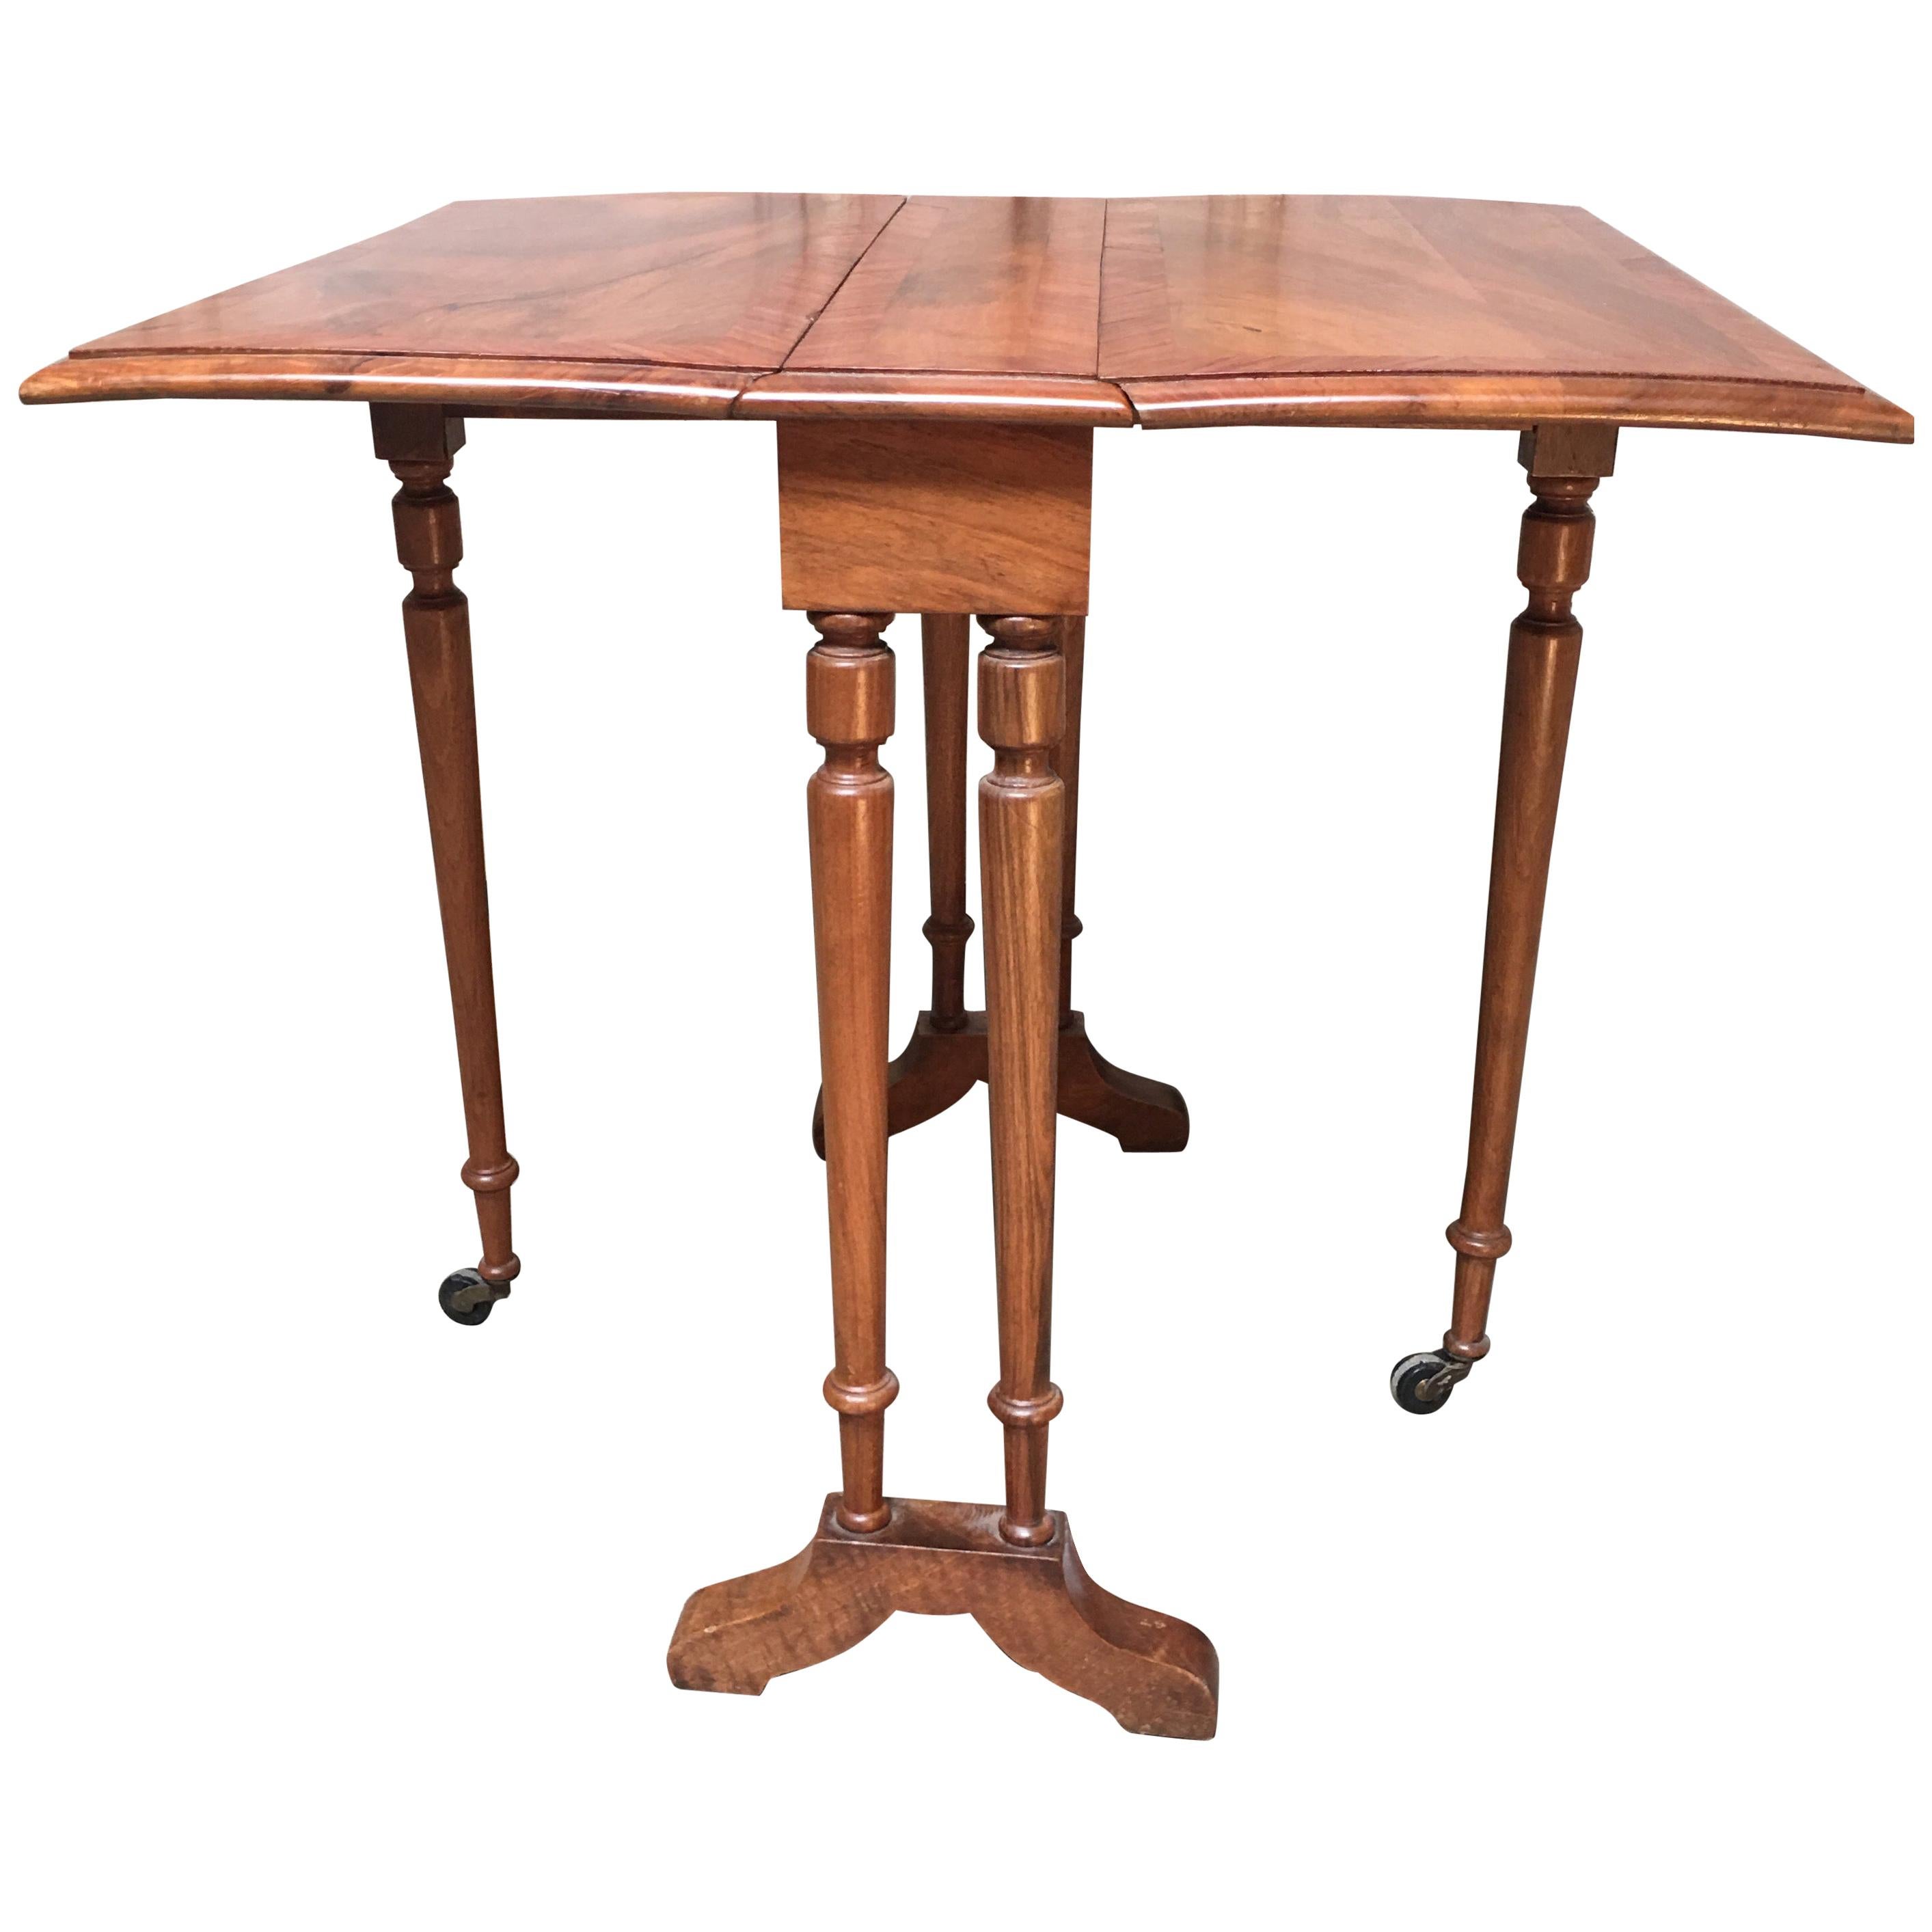 19th Century English Sutherland Drop-Leaf Table in Walnut and Kingwood Veneer For Sale